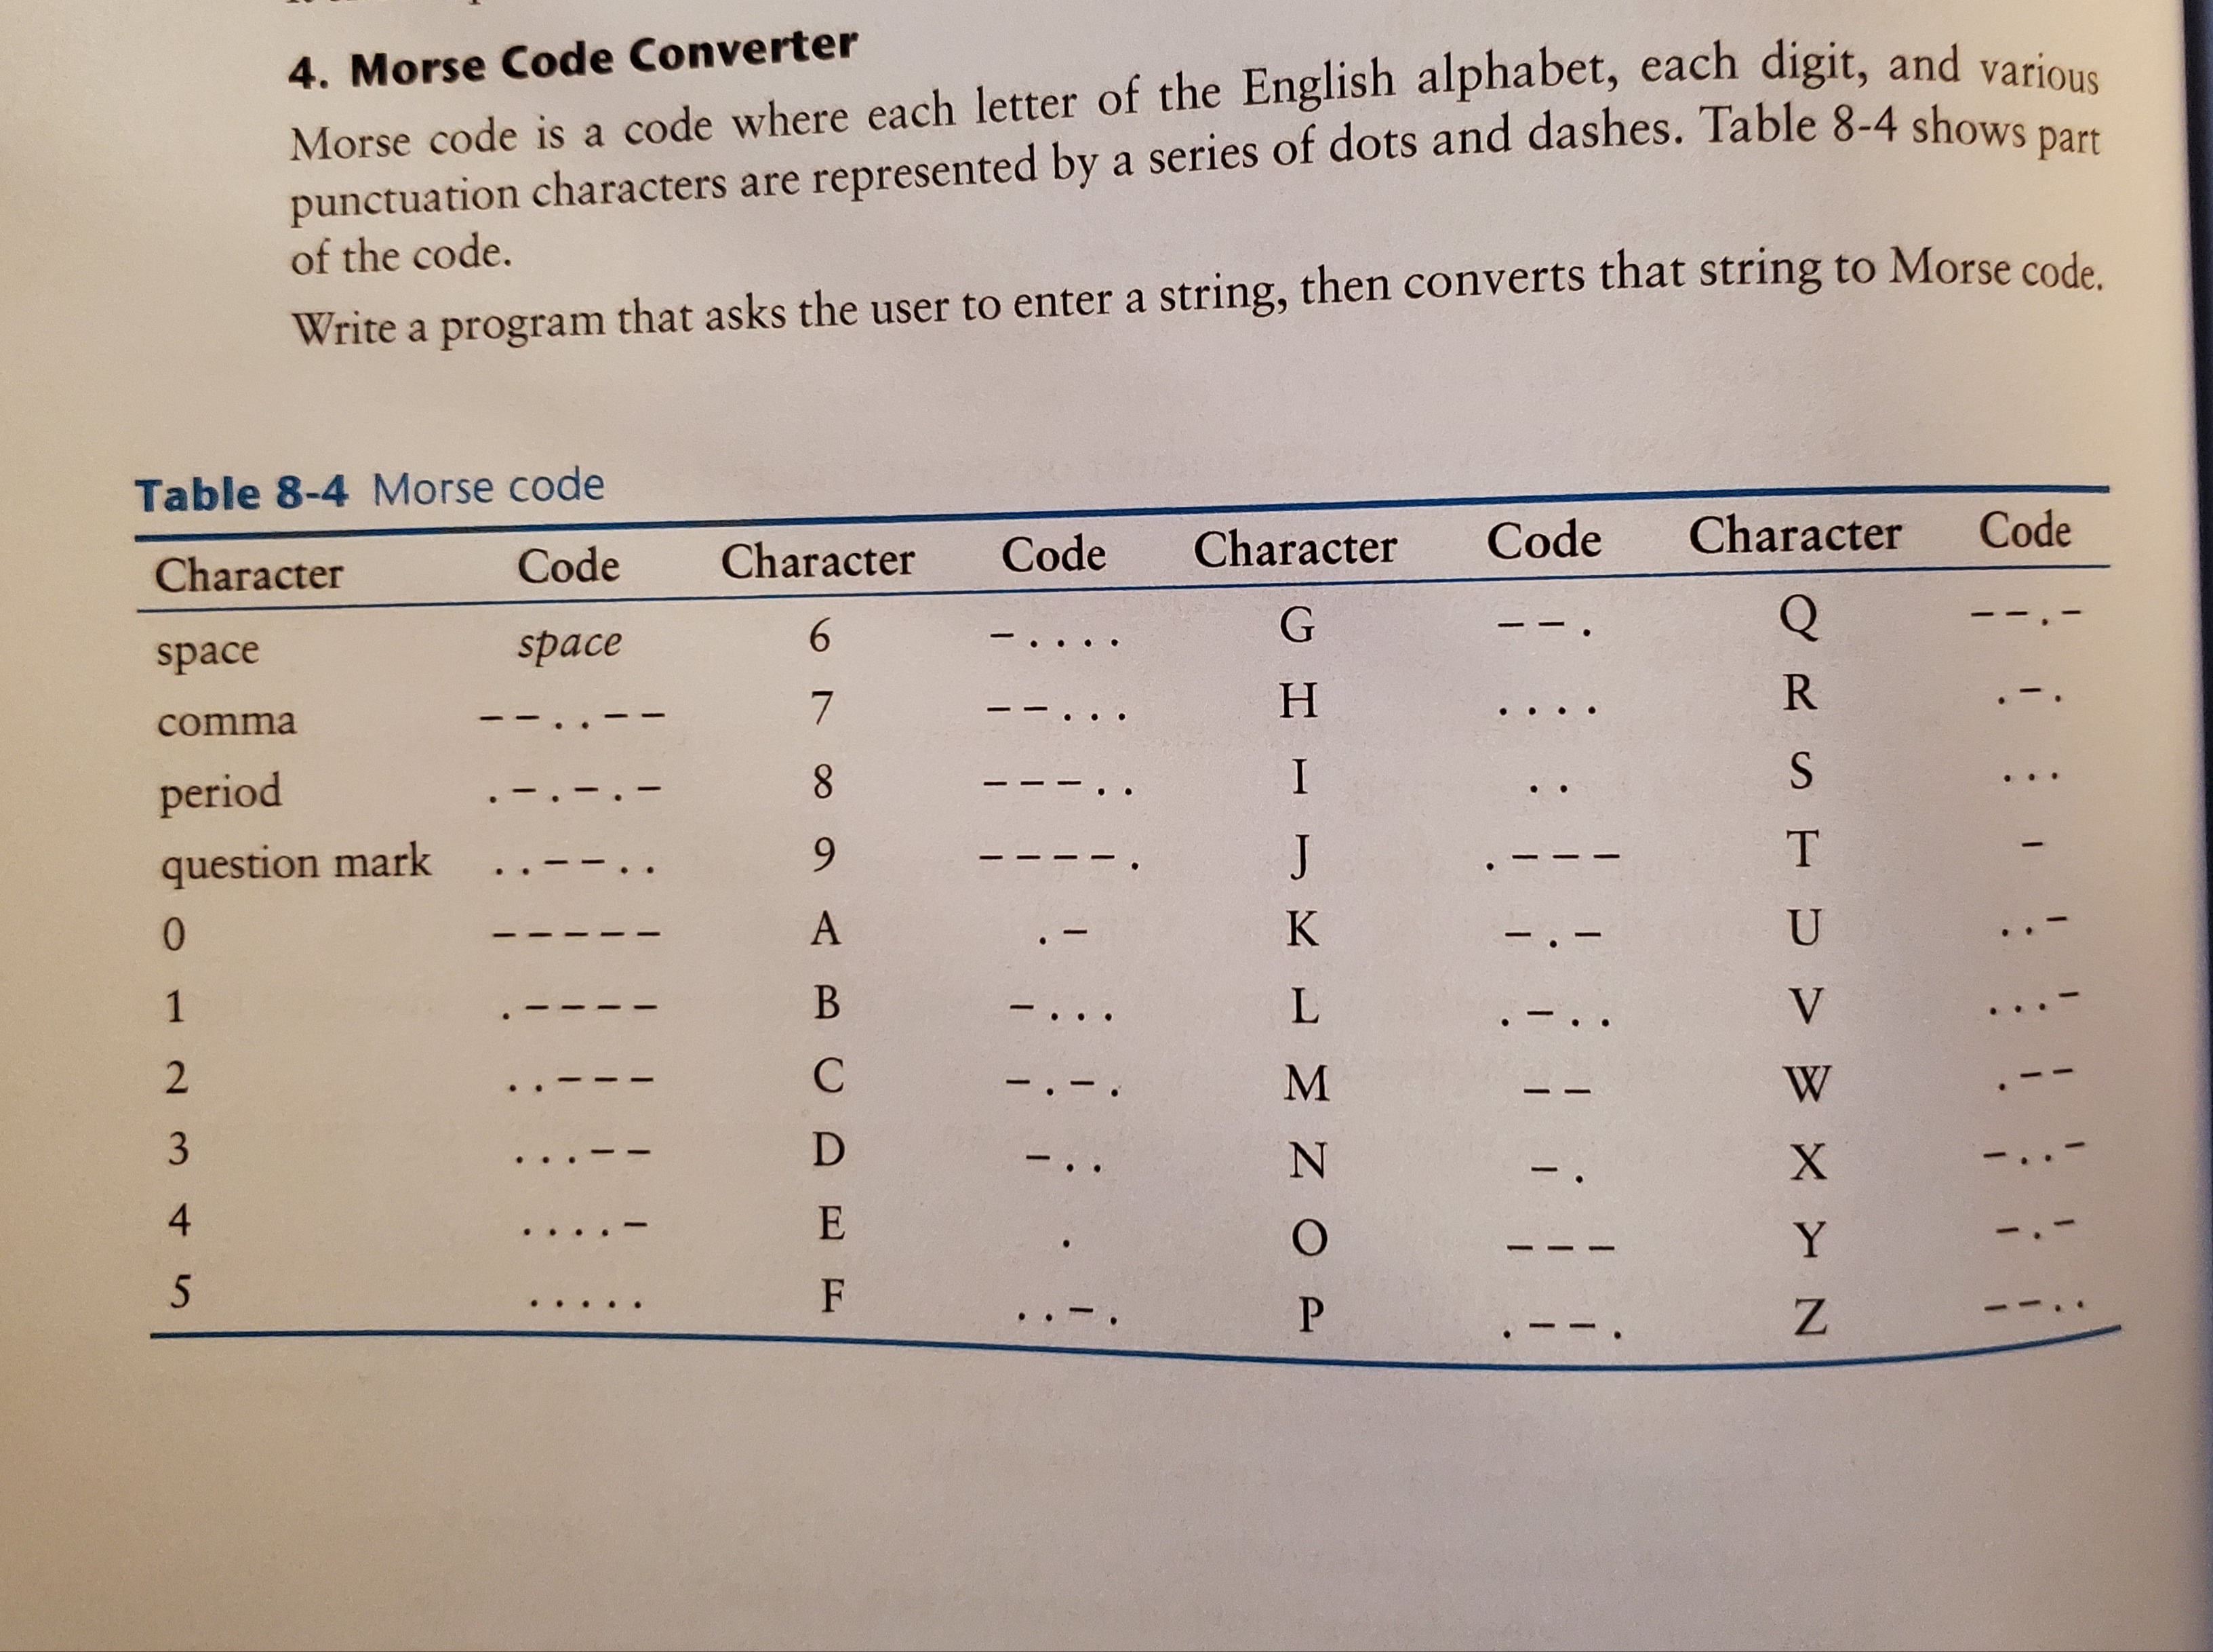 4. Morse Code Converter
Morse code is a code where each letter of the English alphabet, each digit, and vario
punctuation characters are represented by a series of dots and dashes. Table 8-4 shows pe
of the code.
Write a program that asks the user to enter a string, then converts that string to Morse code
Table 8-4 Morse code
Character
Code
Character
Code
Character
Code
Character
Code
space
space
6.
comma
H.
R
period
8.
I
question mark
6.
J
T.
0.
A
K
1
W
3
E
4
